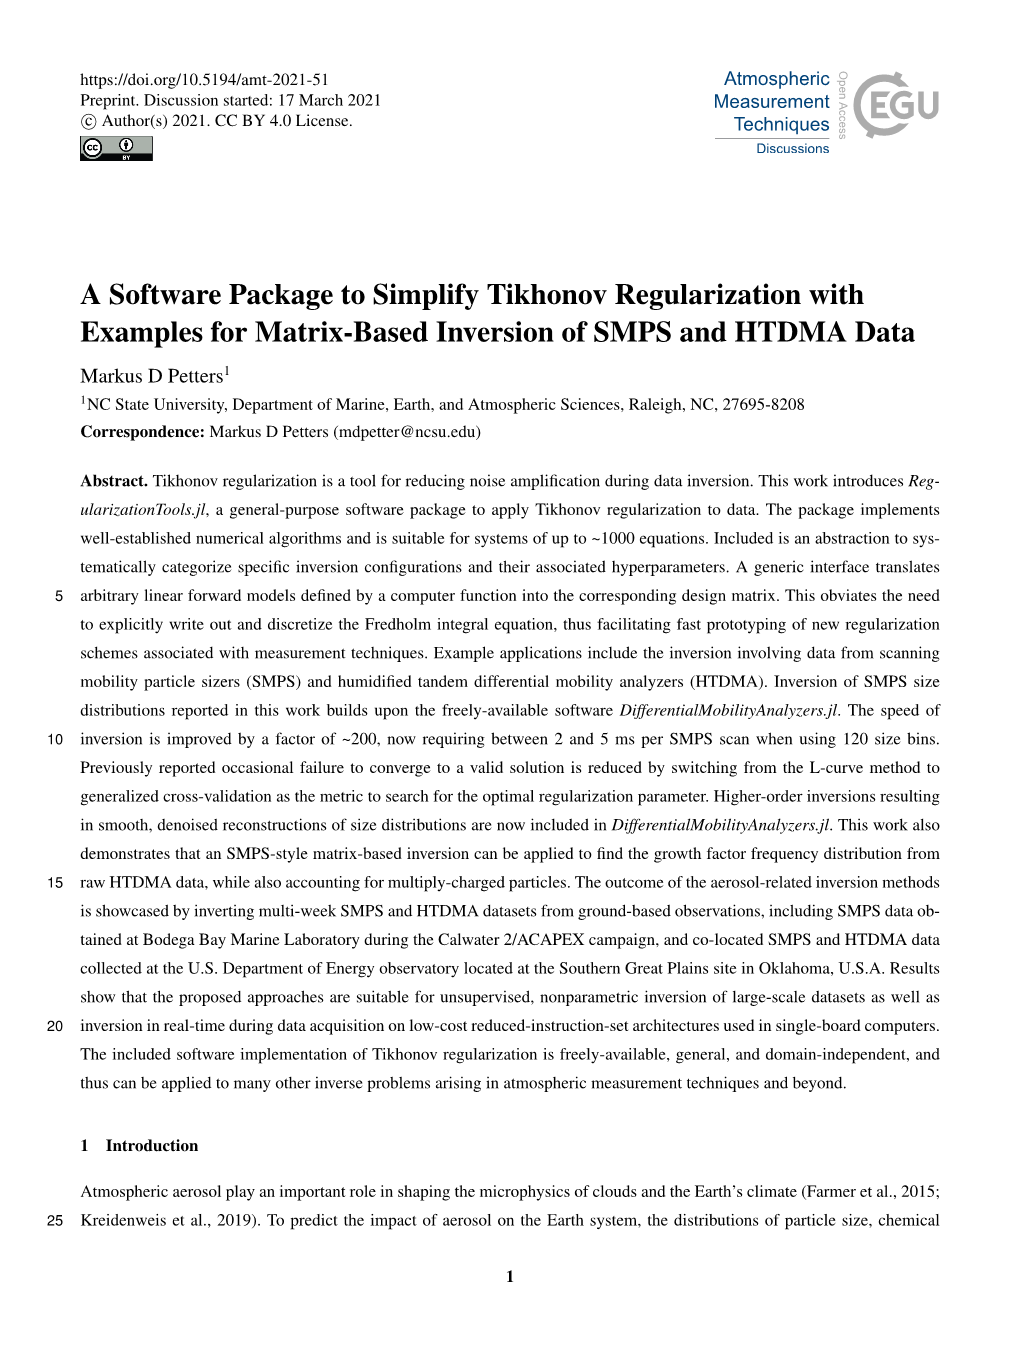 A Software Package to Simplify Tikhonov Regularization With